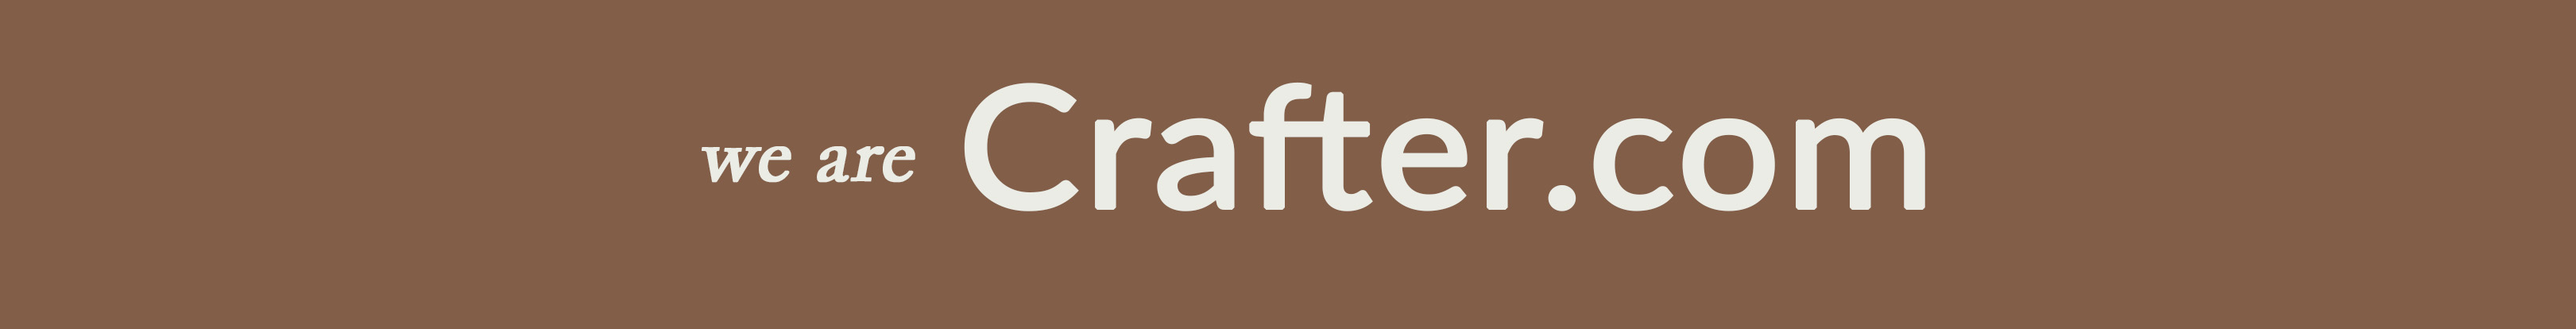 Fundraising | We Are Crafter.com